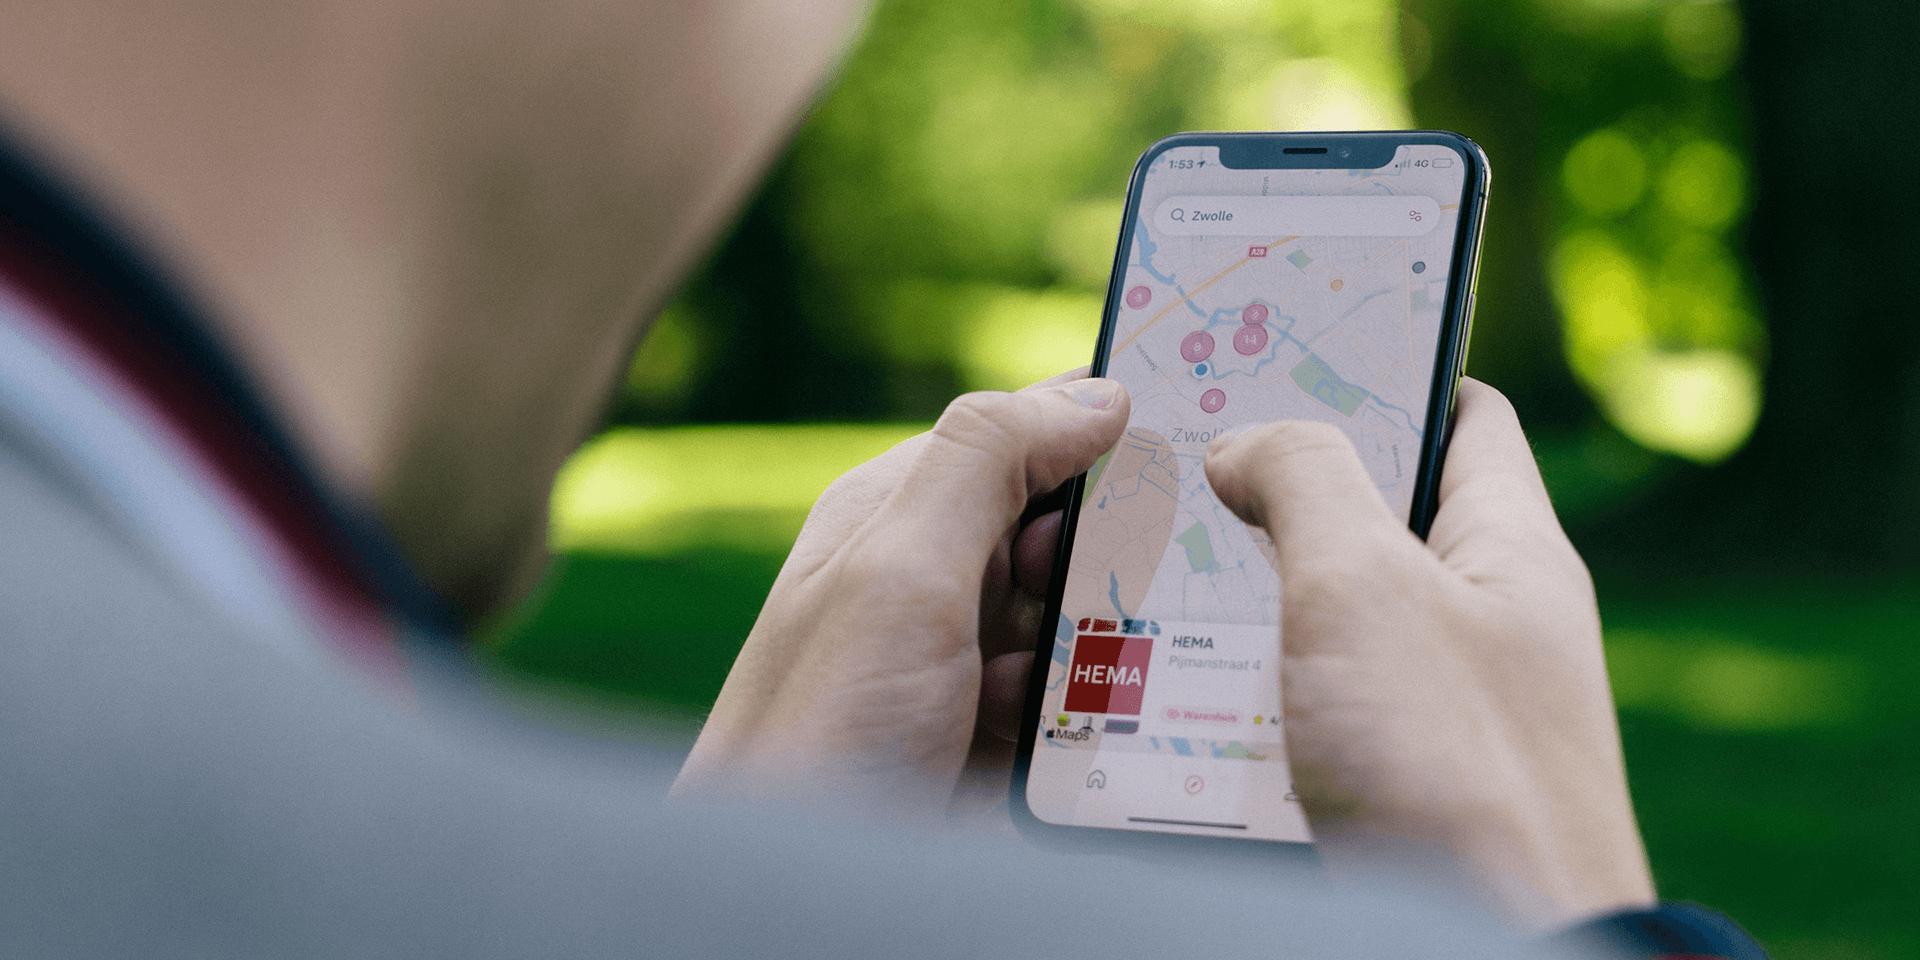 Google Maps open on a smartphone.